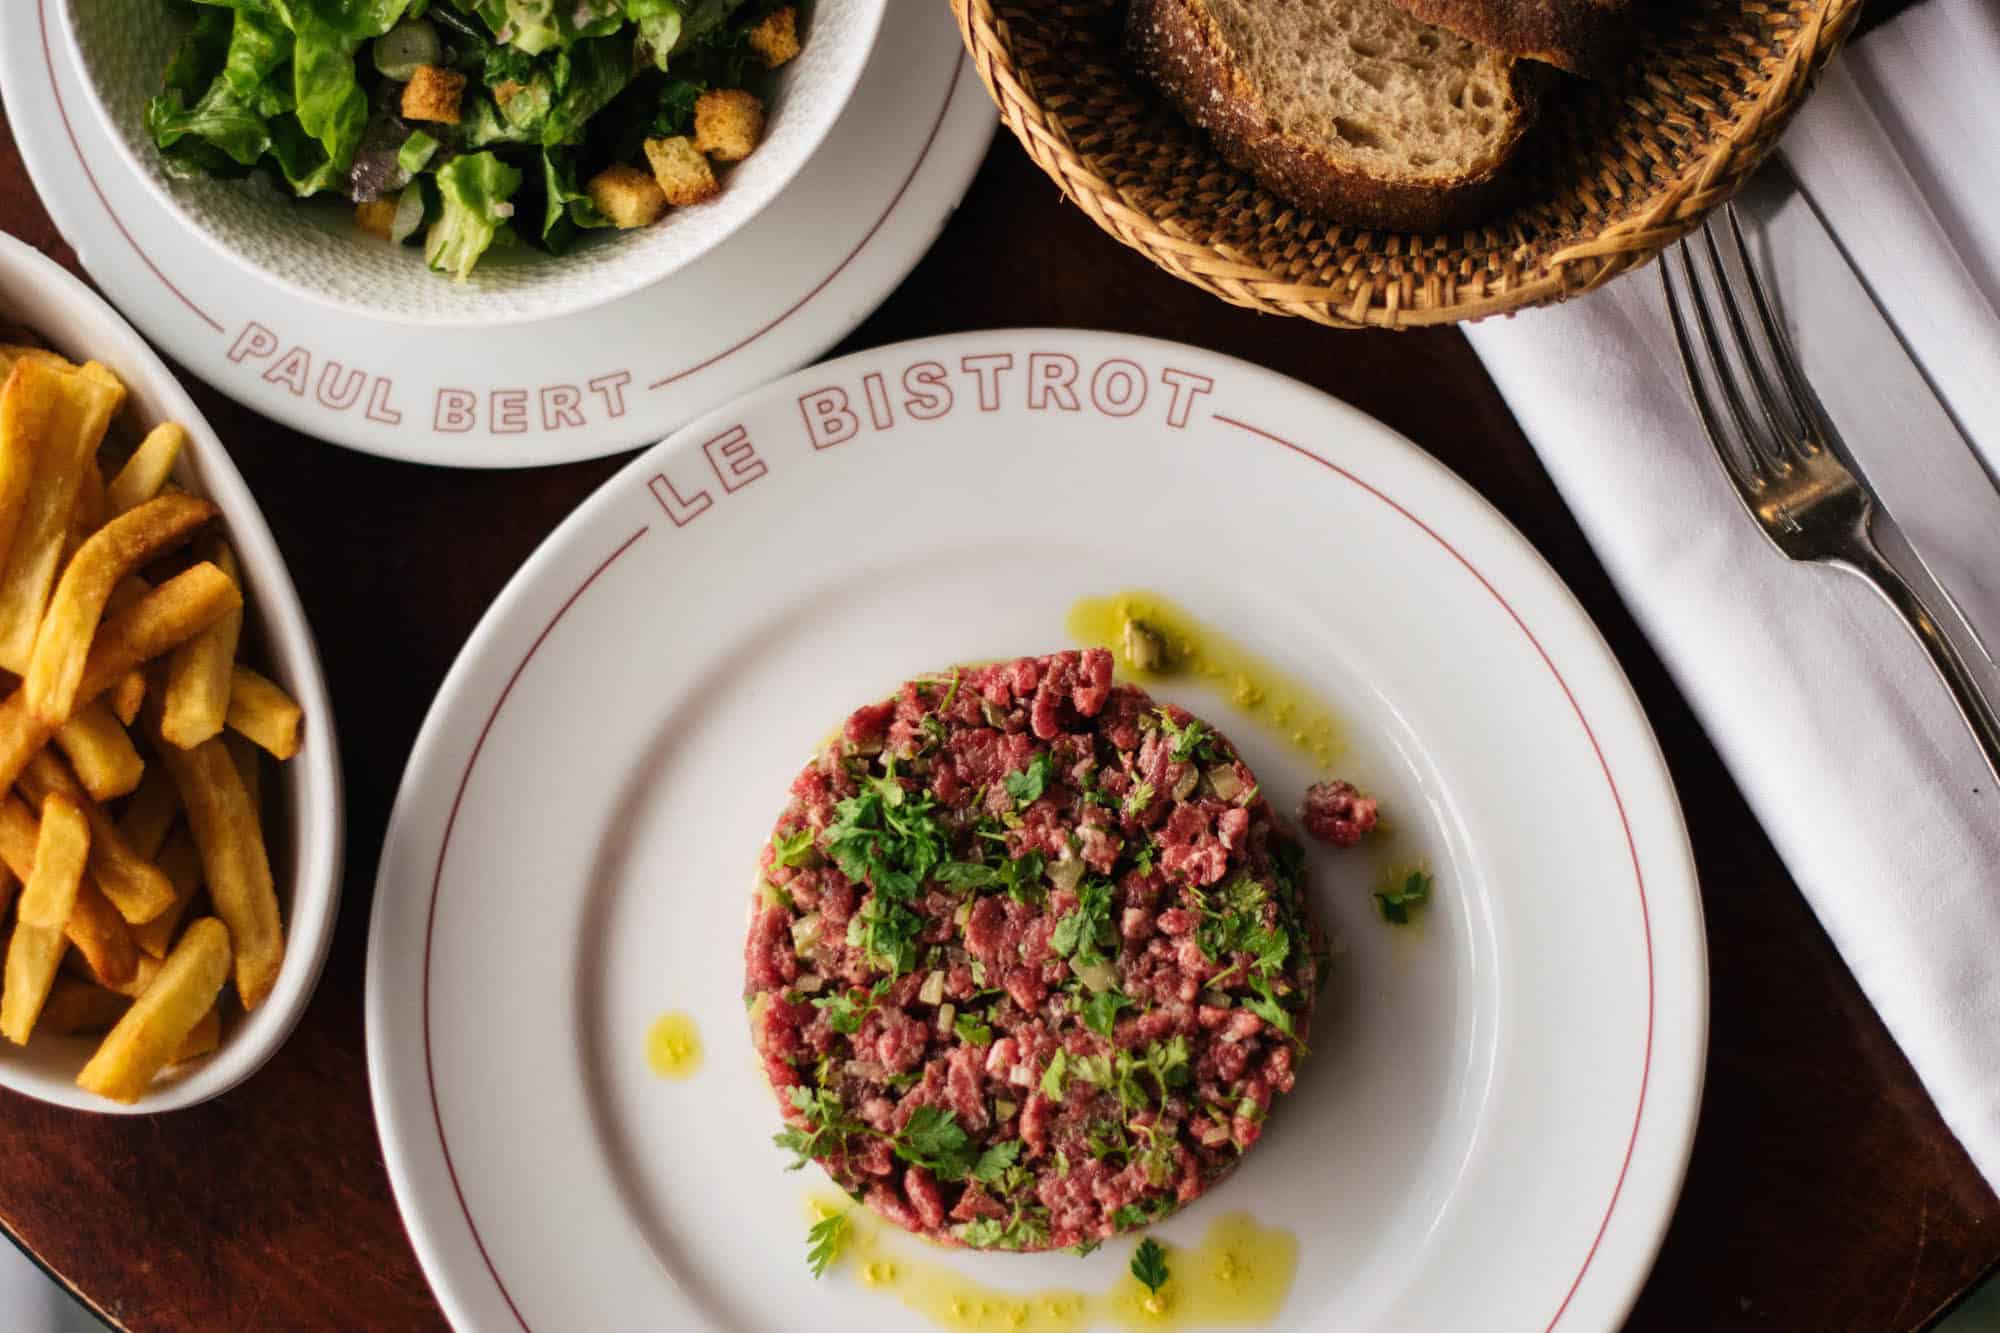 Signature steak tartare at the Bistrot Paul Bert in Paris with sides of bread, salad and fries.